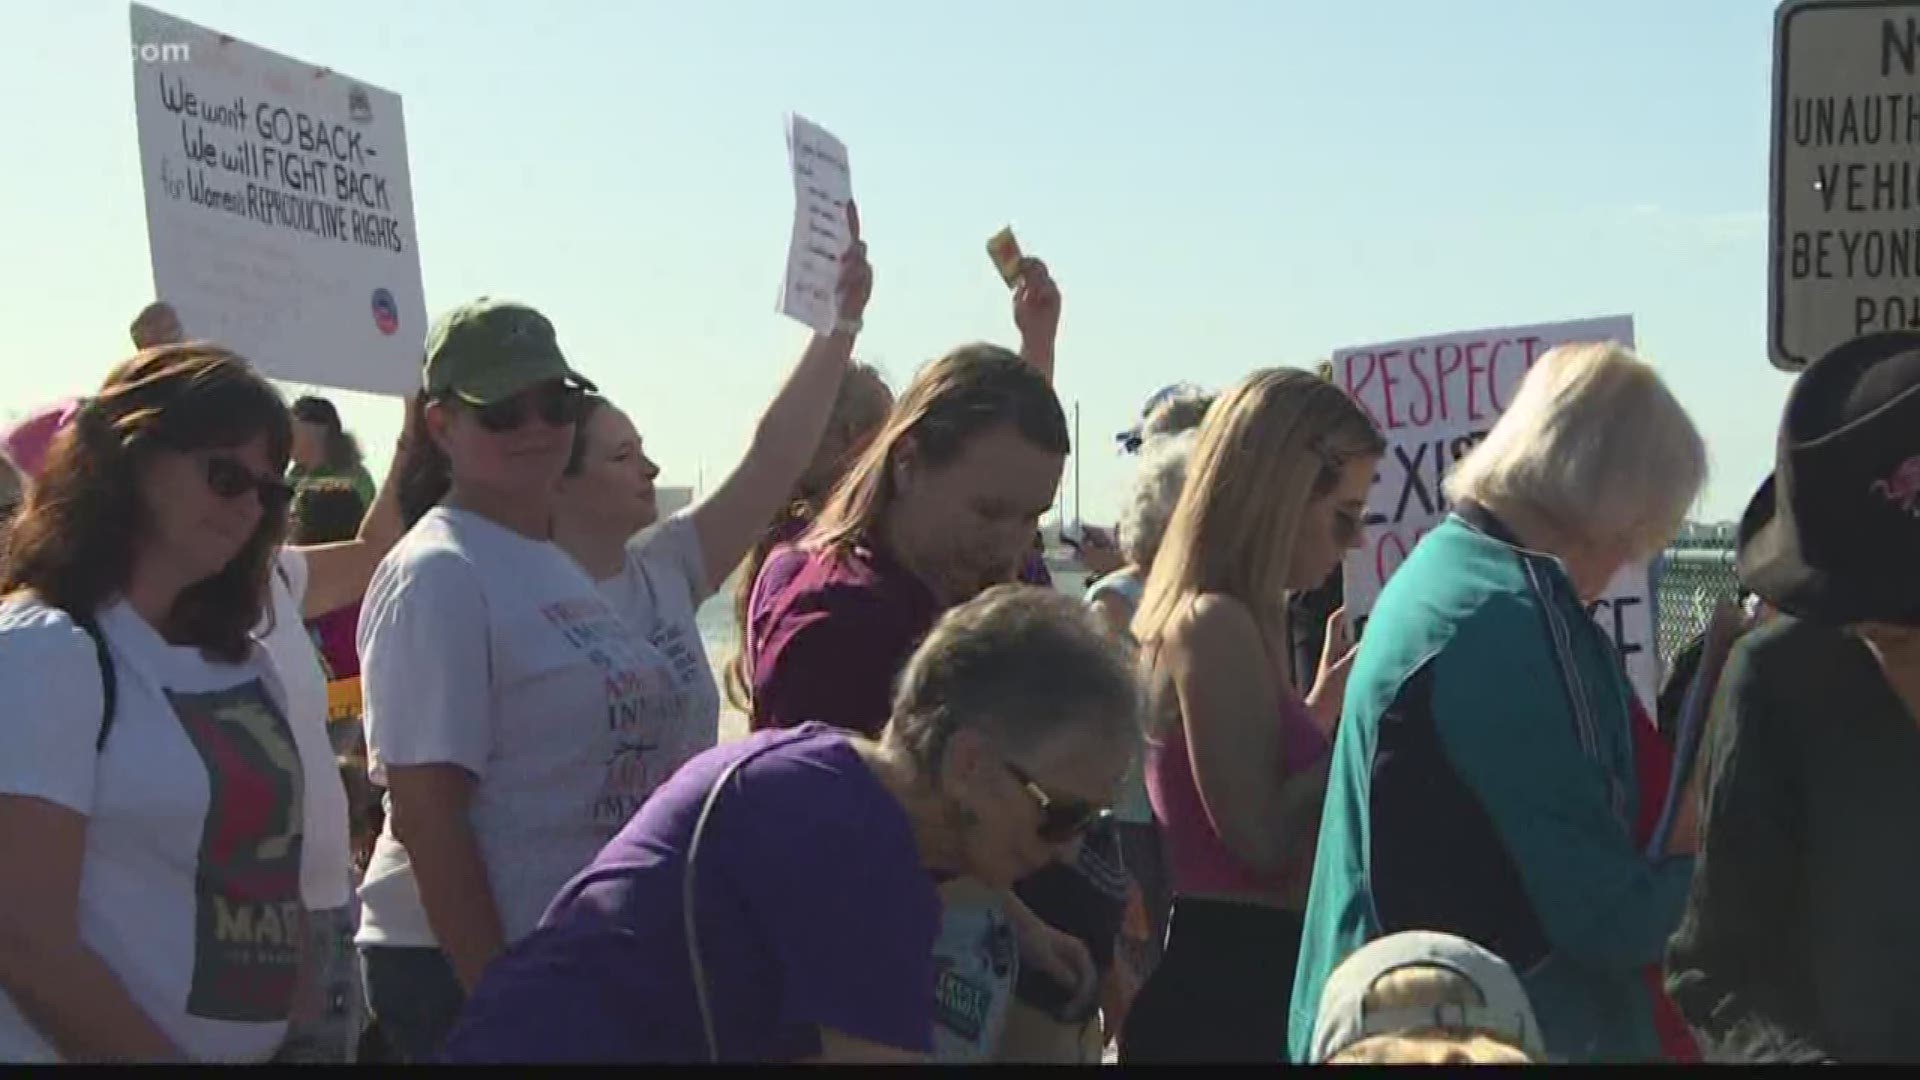 Hundreds showed up today to march in support of a variety of causes.